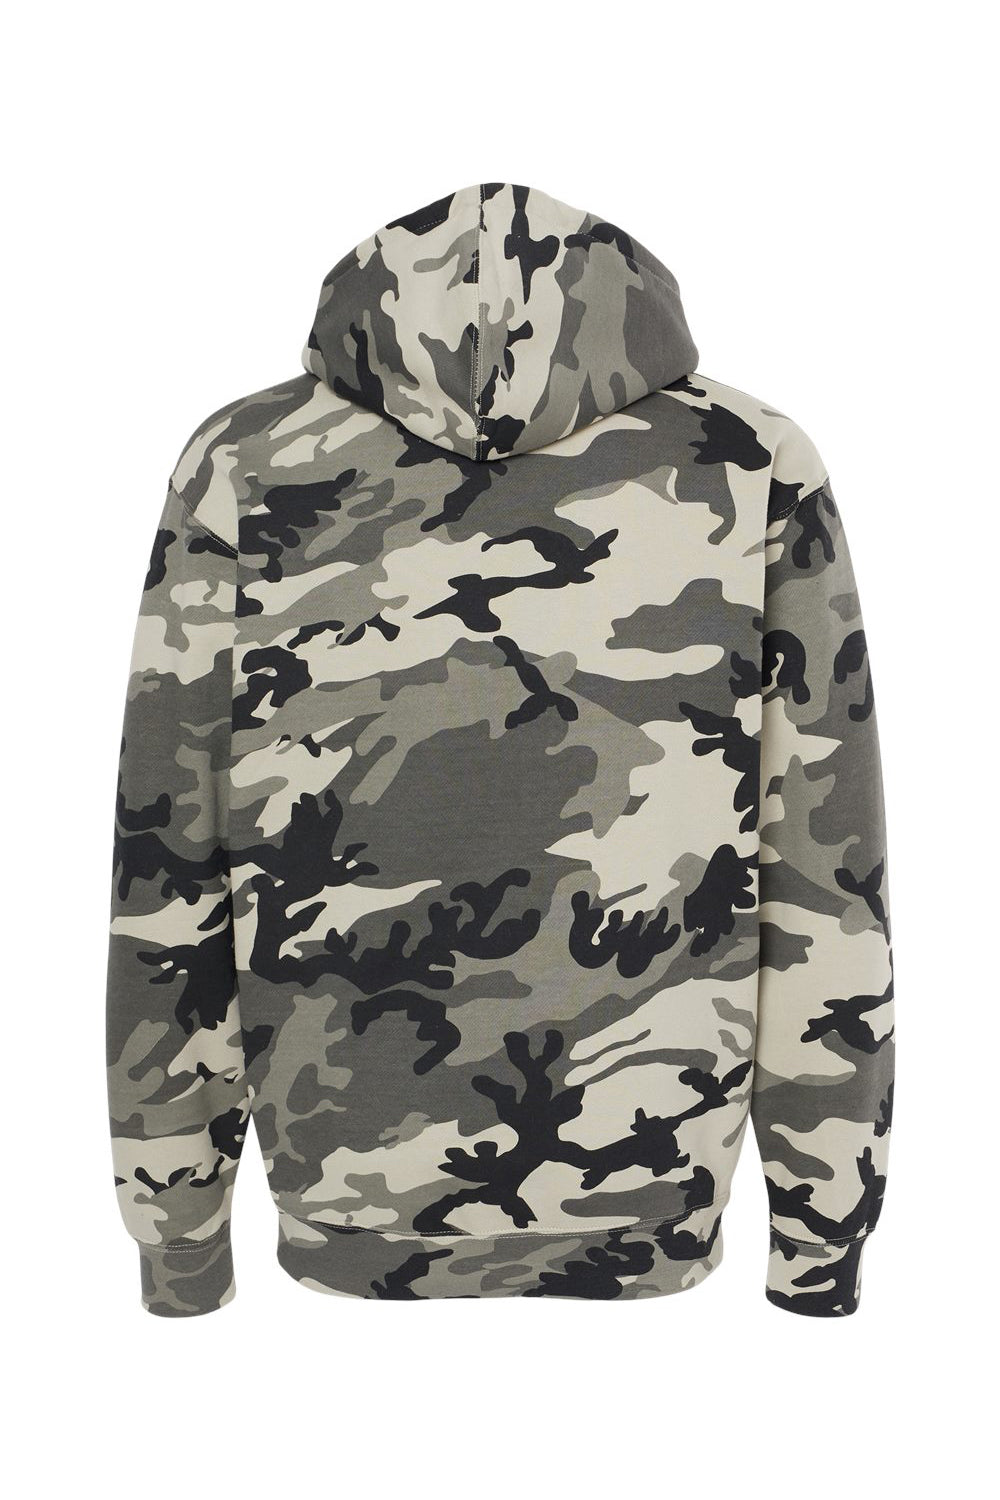 Independent Trading Co. IND4000 Mens Hooded Sweatshirt Hoodie Snow Camo Flat Back